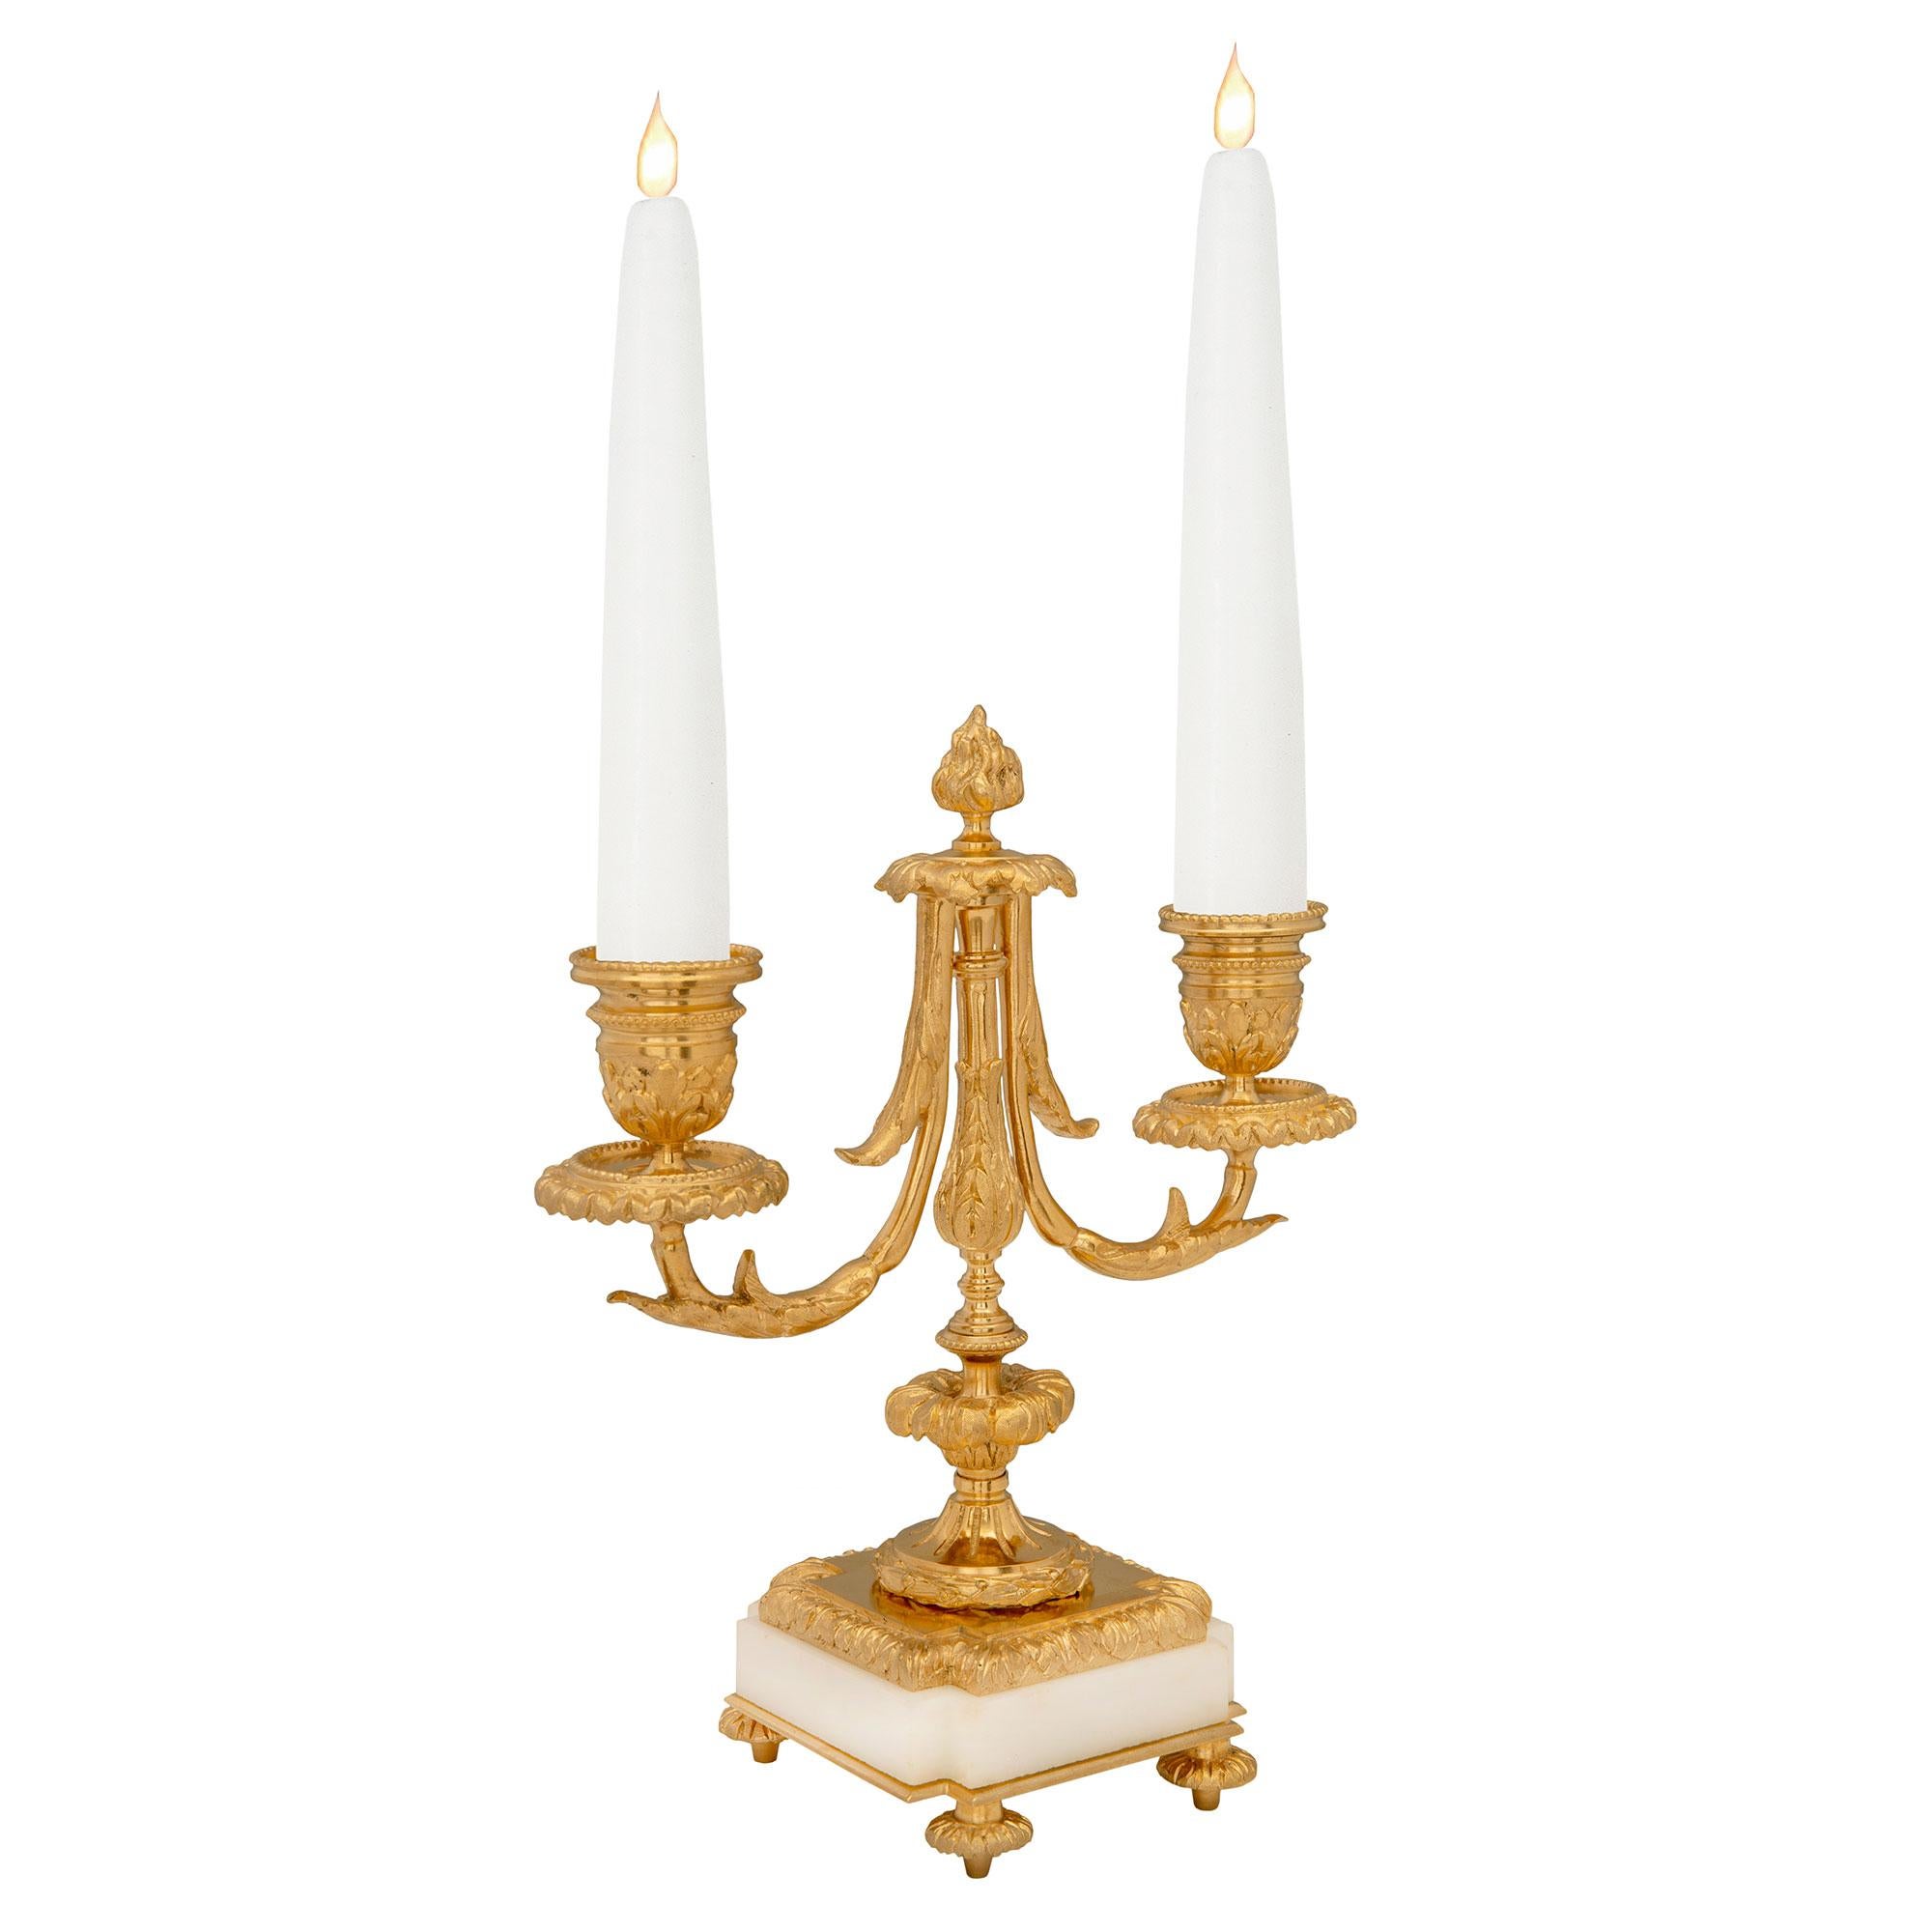 A charming and most elegant pair of French 19th century Louis XVI st. white Carrara marble and ormolu two arm candelabras. Each candelabra is raised by fine topie shaped feet below the striking square white Carrara marble bases with most decorative